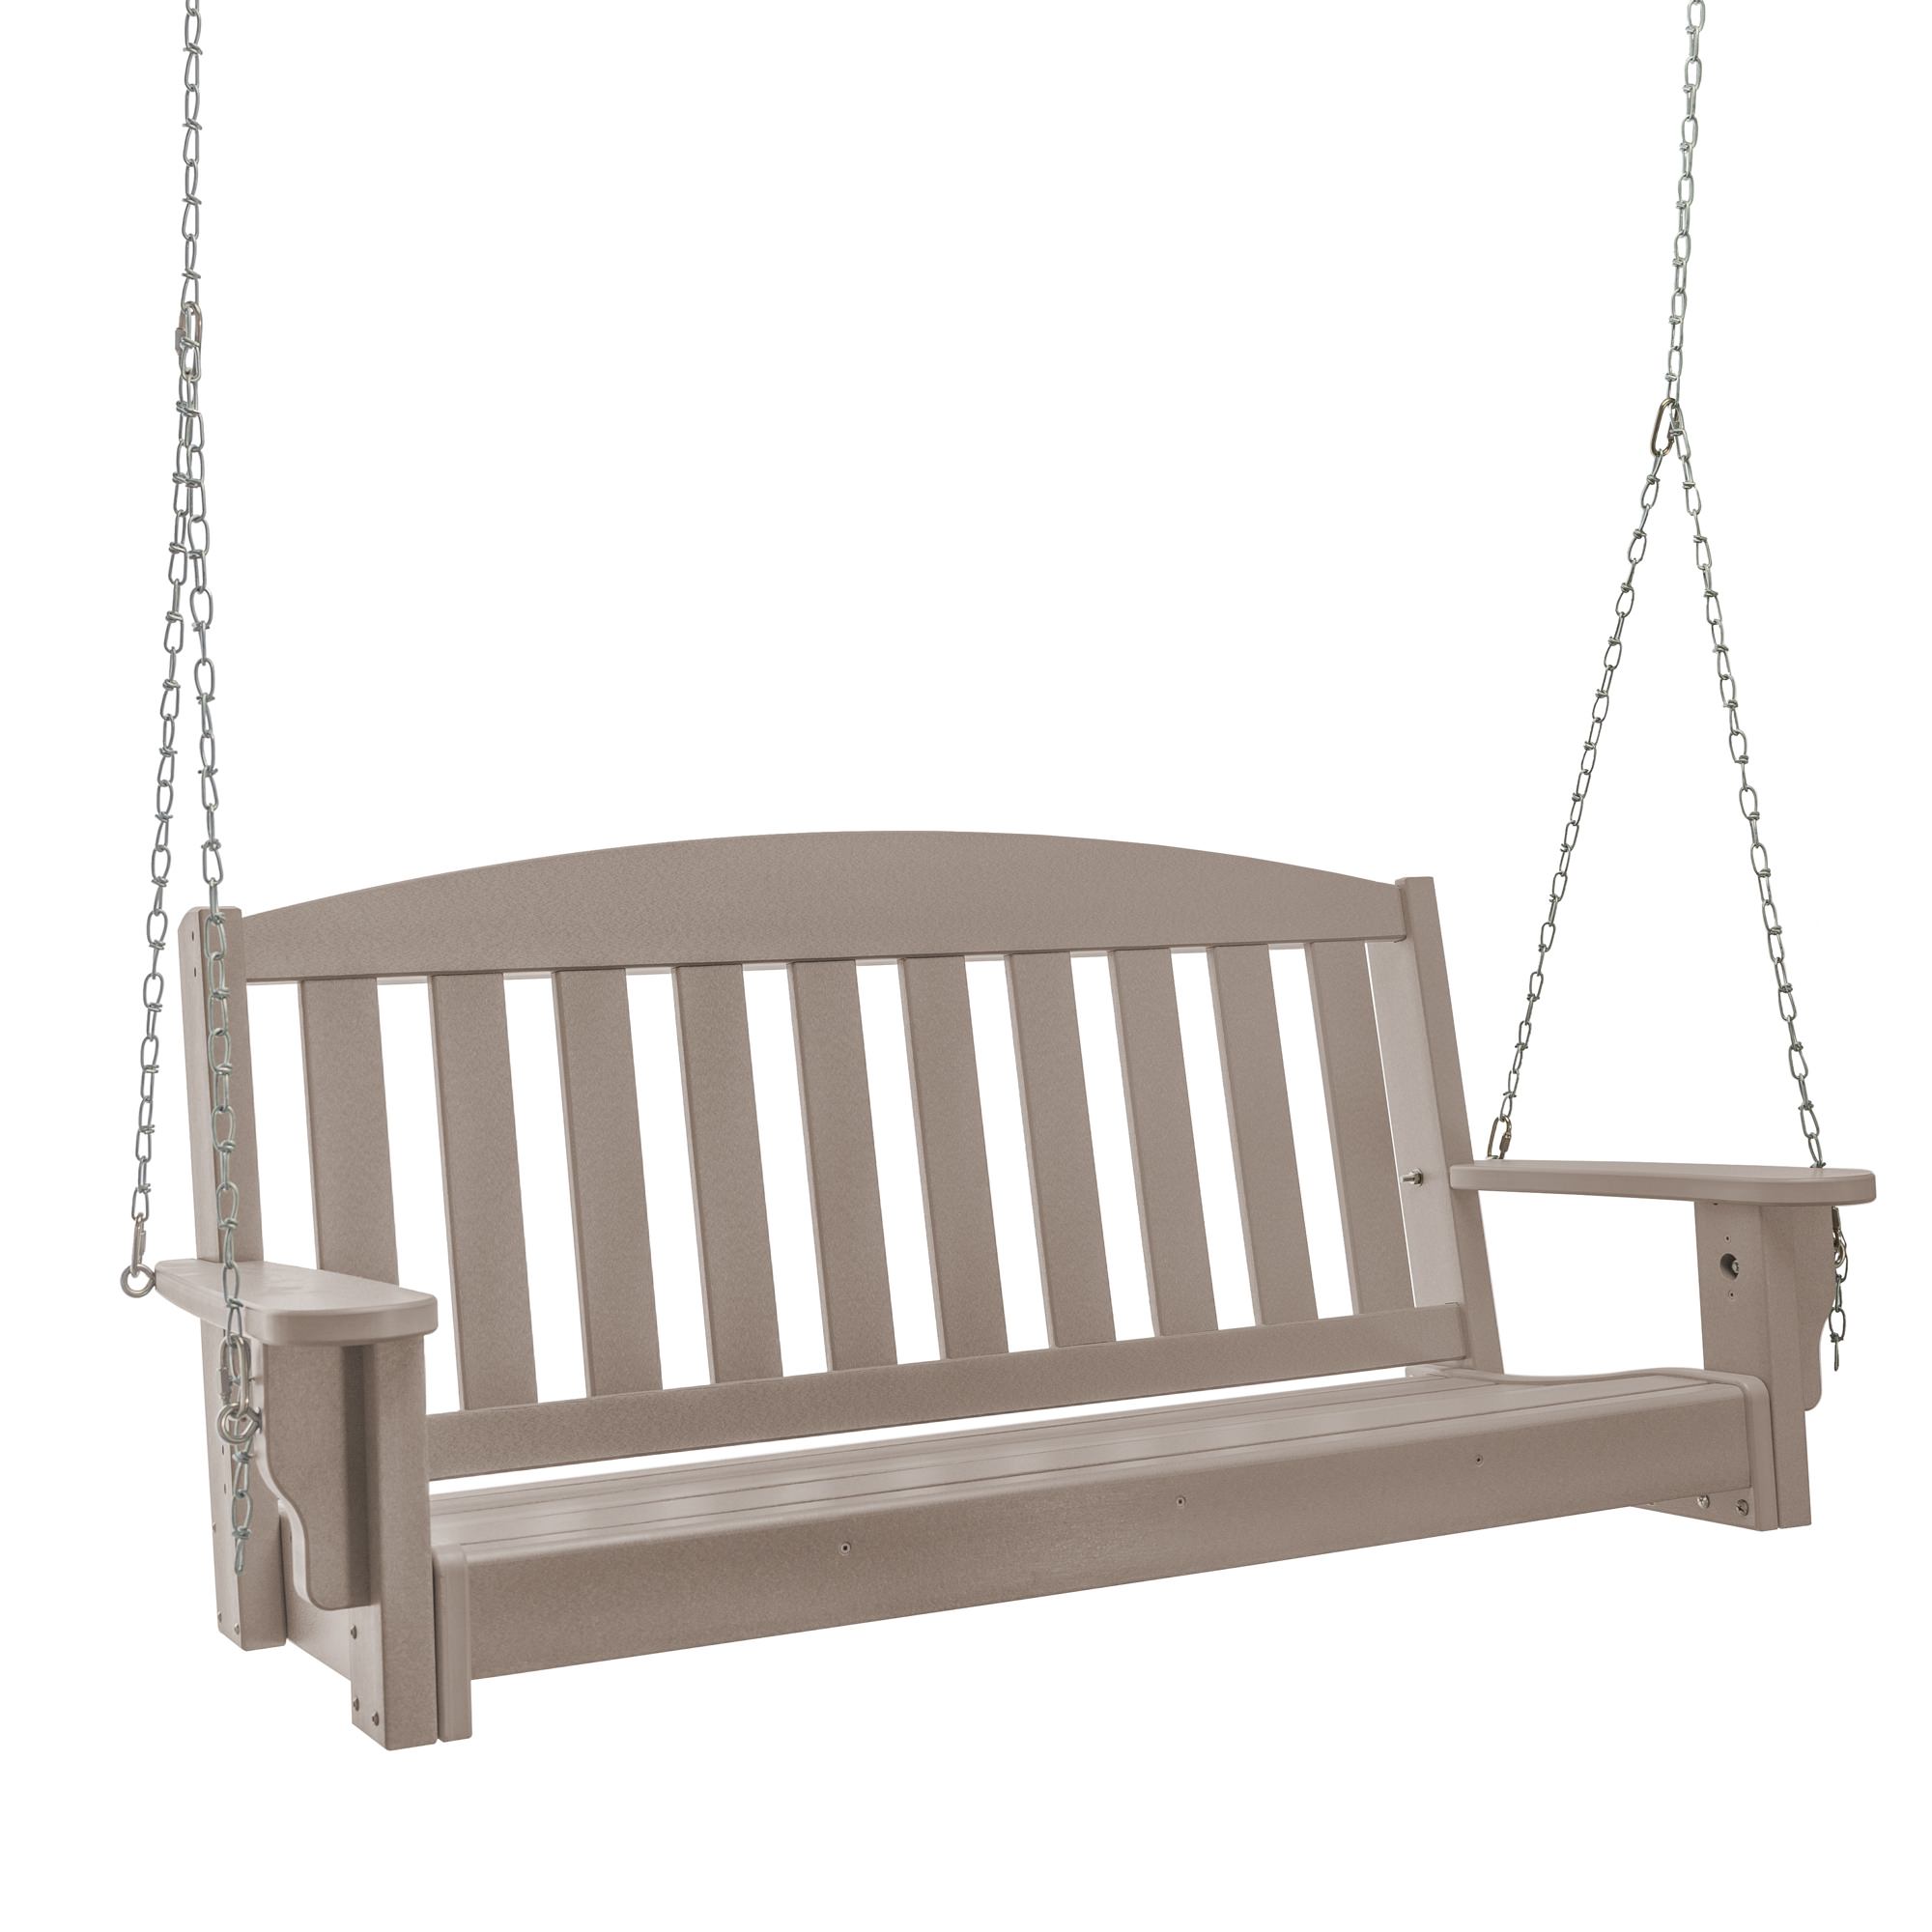 Bench Swing Instructions